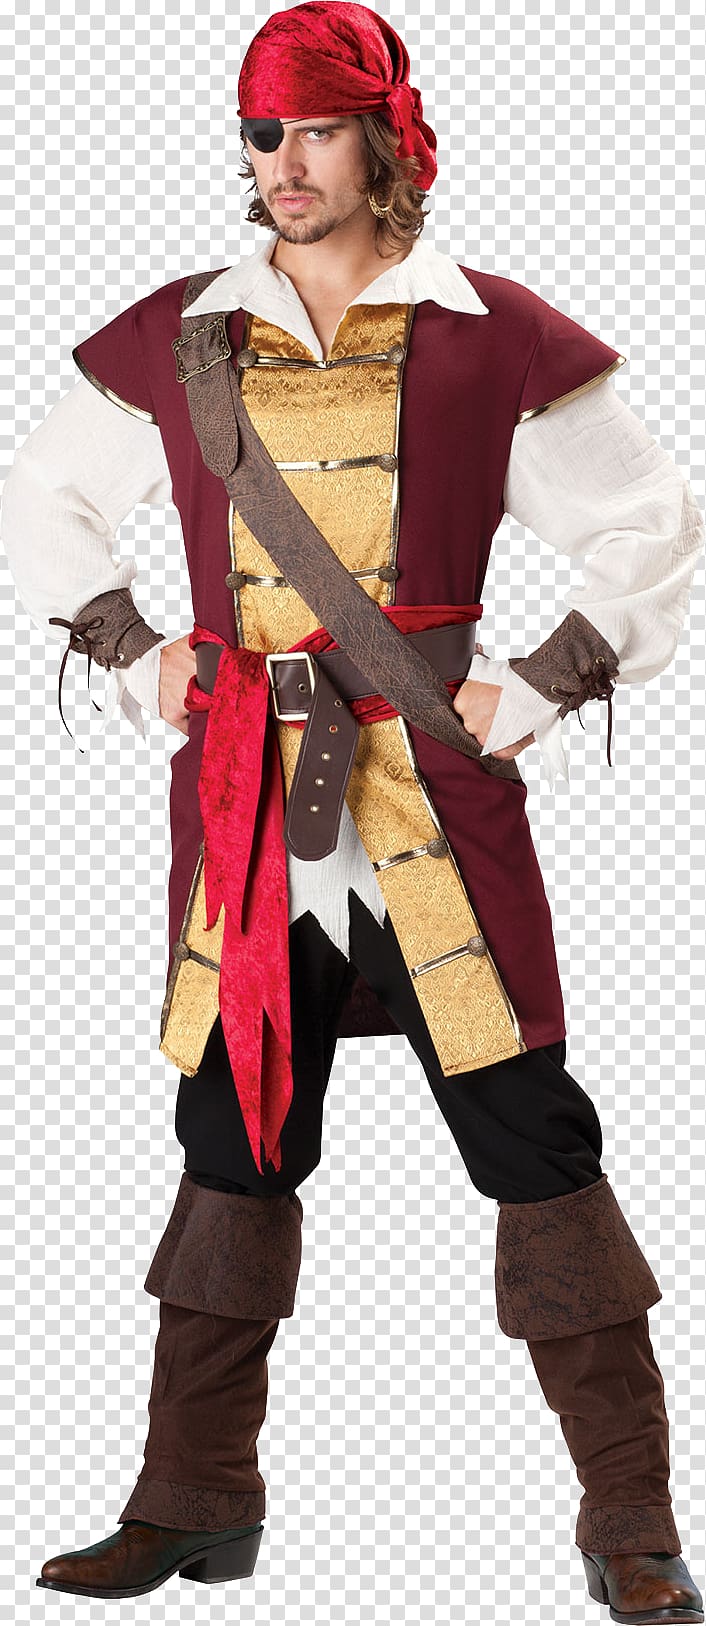 Halloween costume Piracy Costume party Couple costume, Pirate transparent background PNG clipart